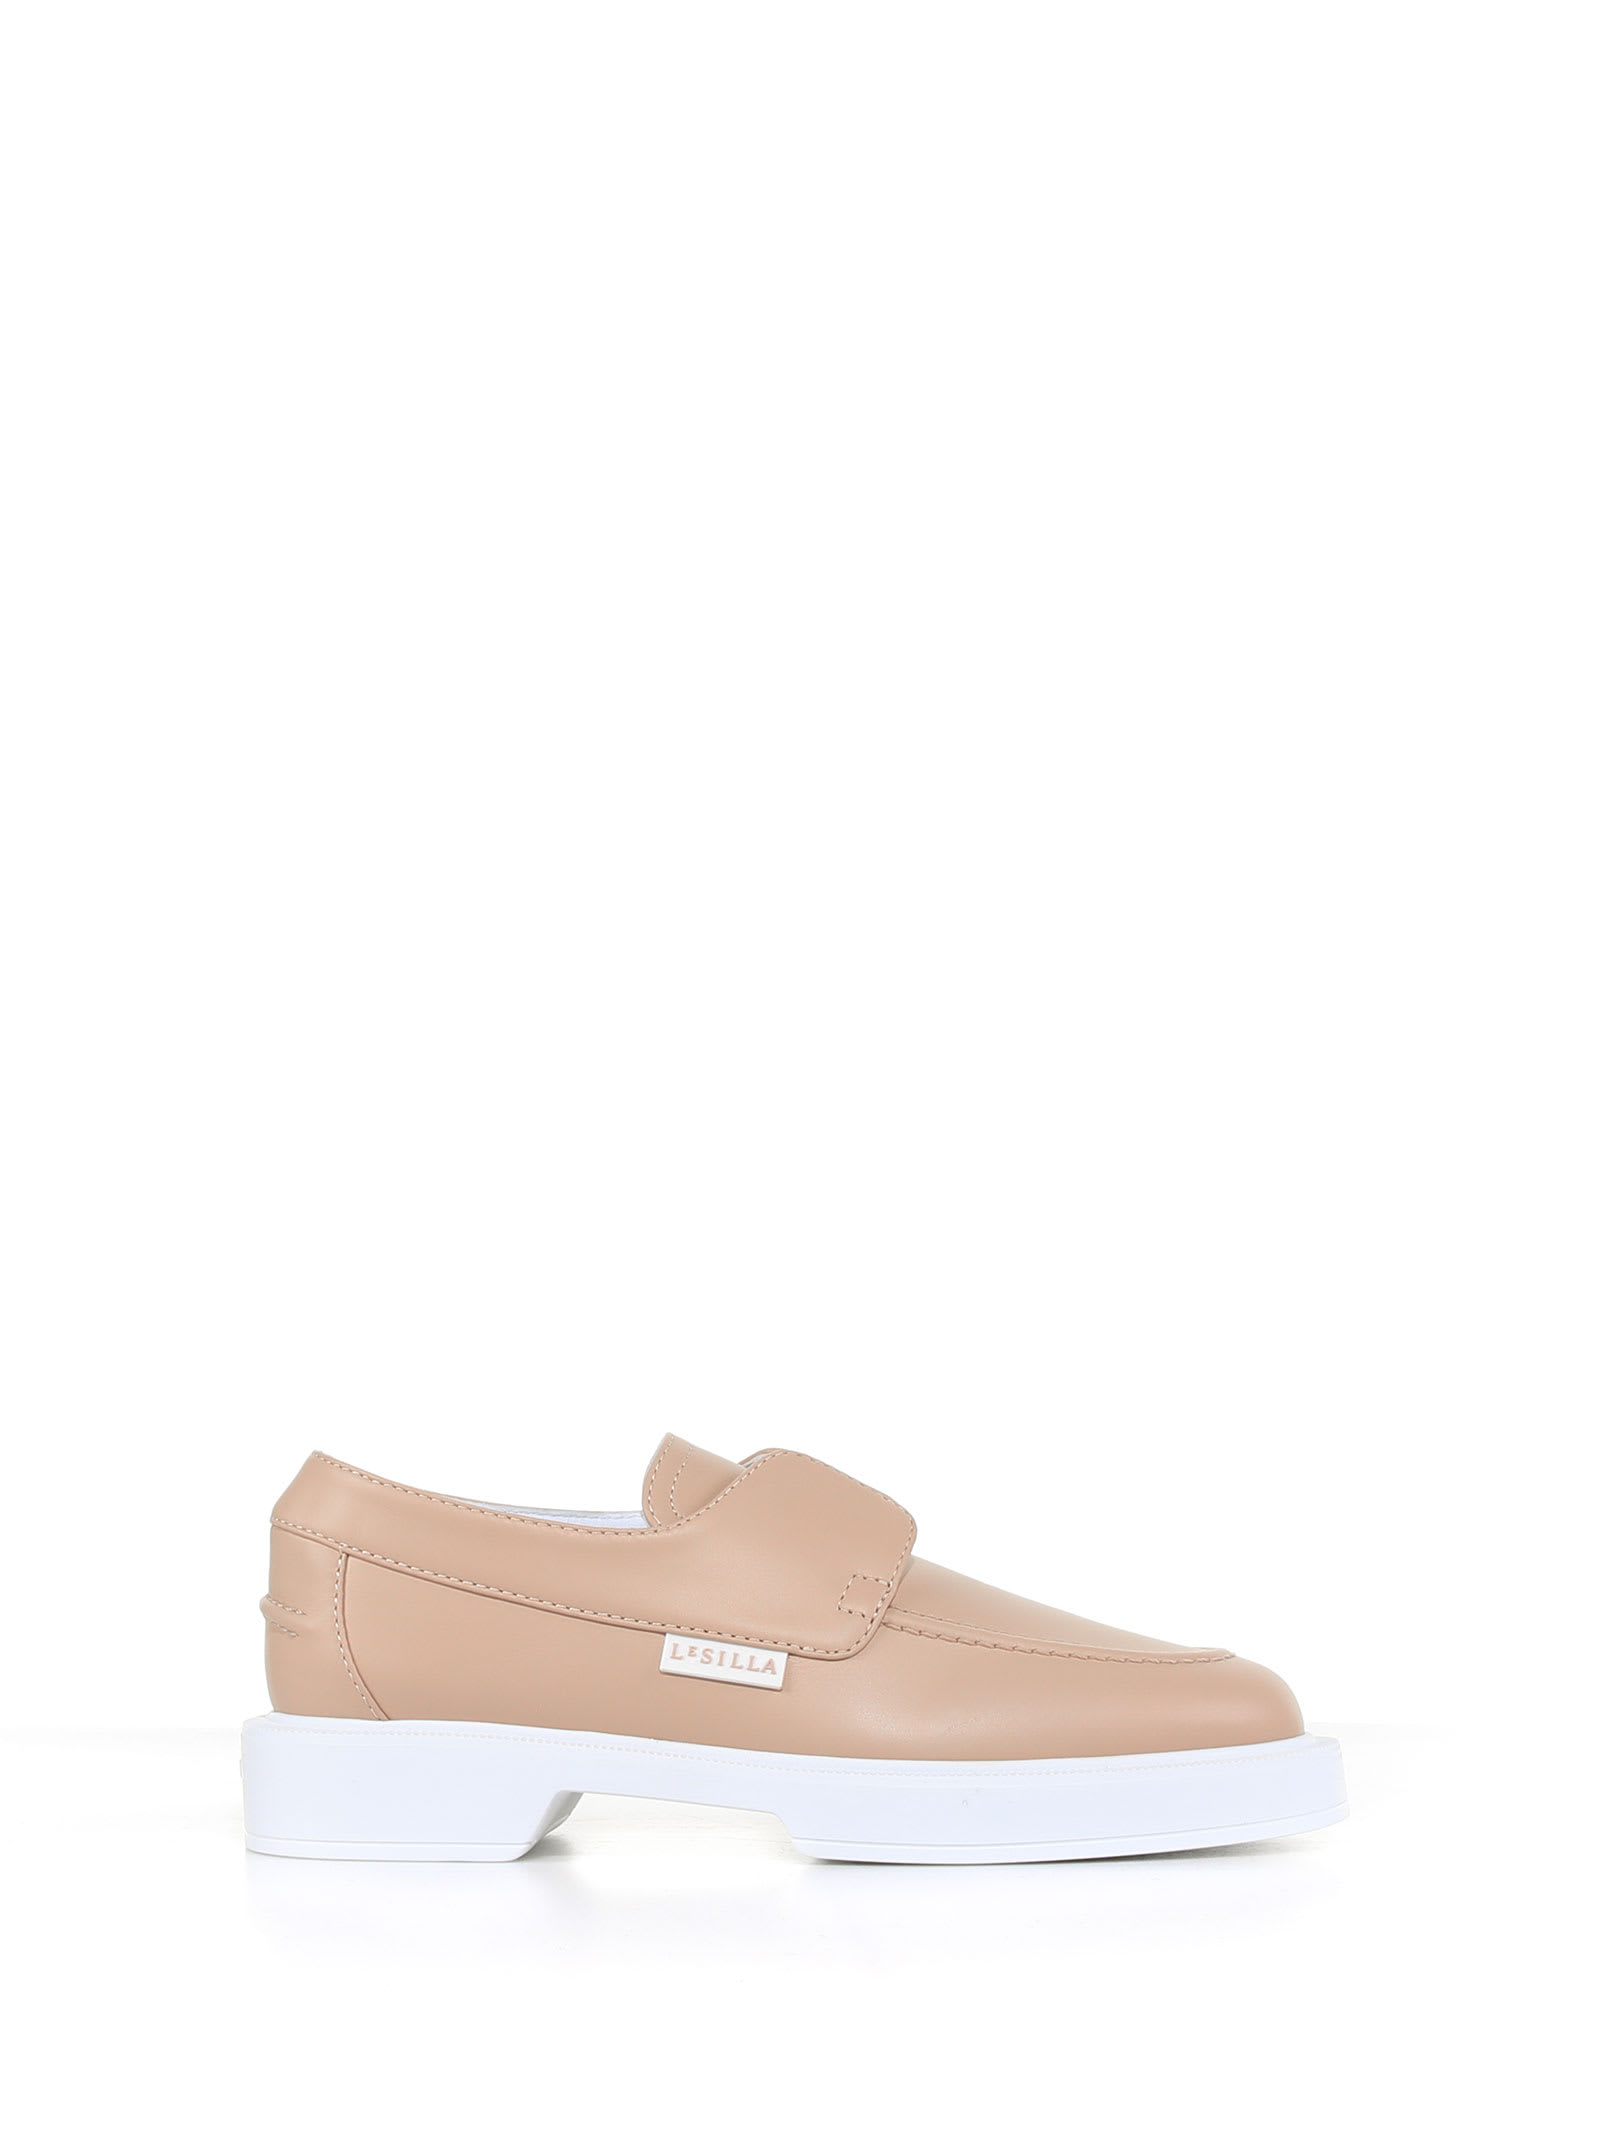 Le Silla Yacht Loafer In Nappa Leather